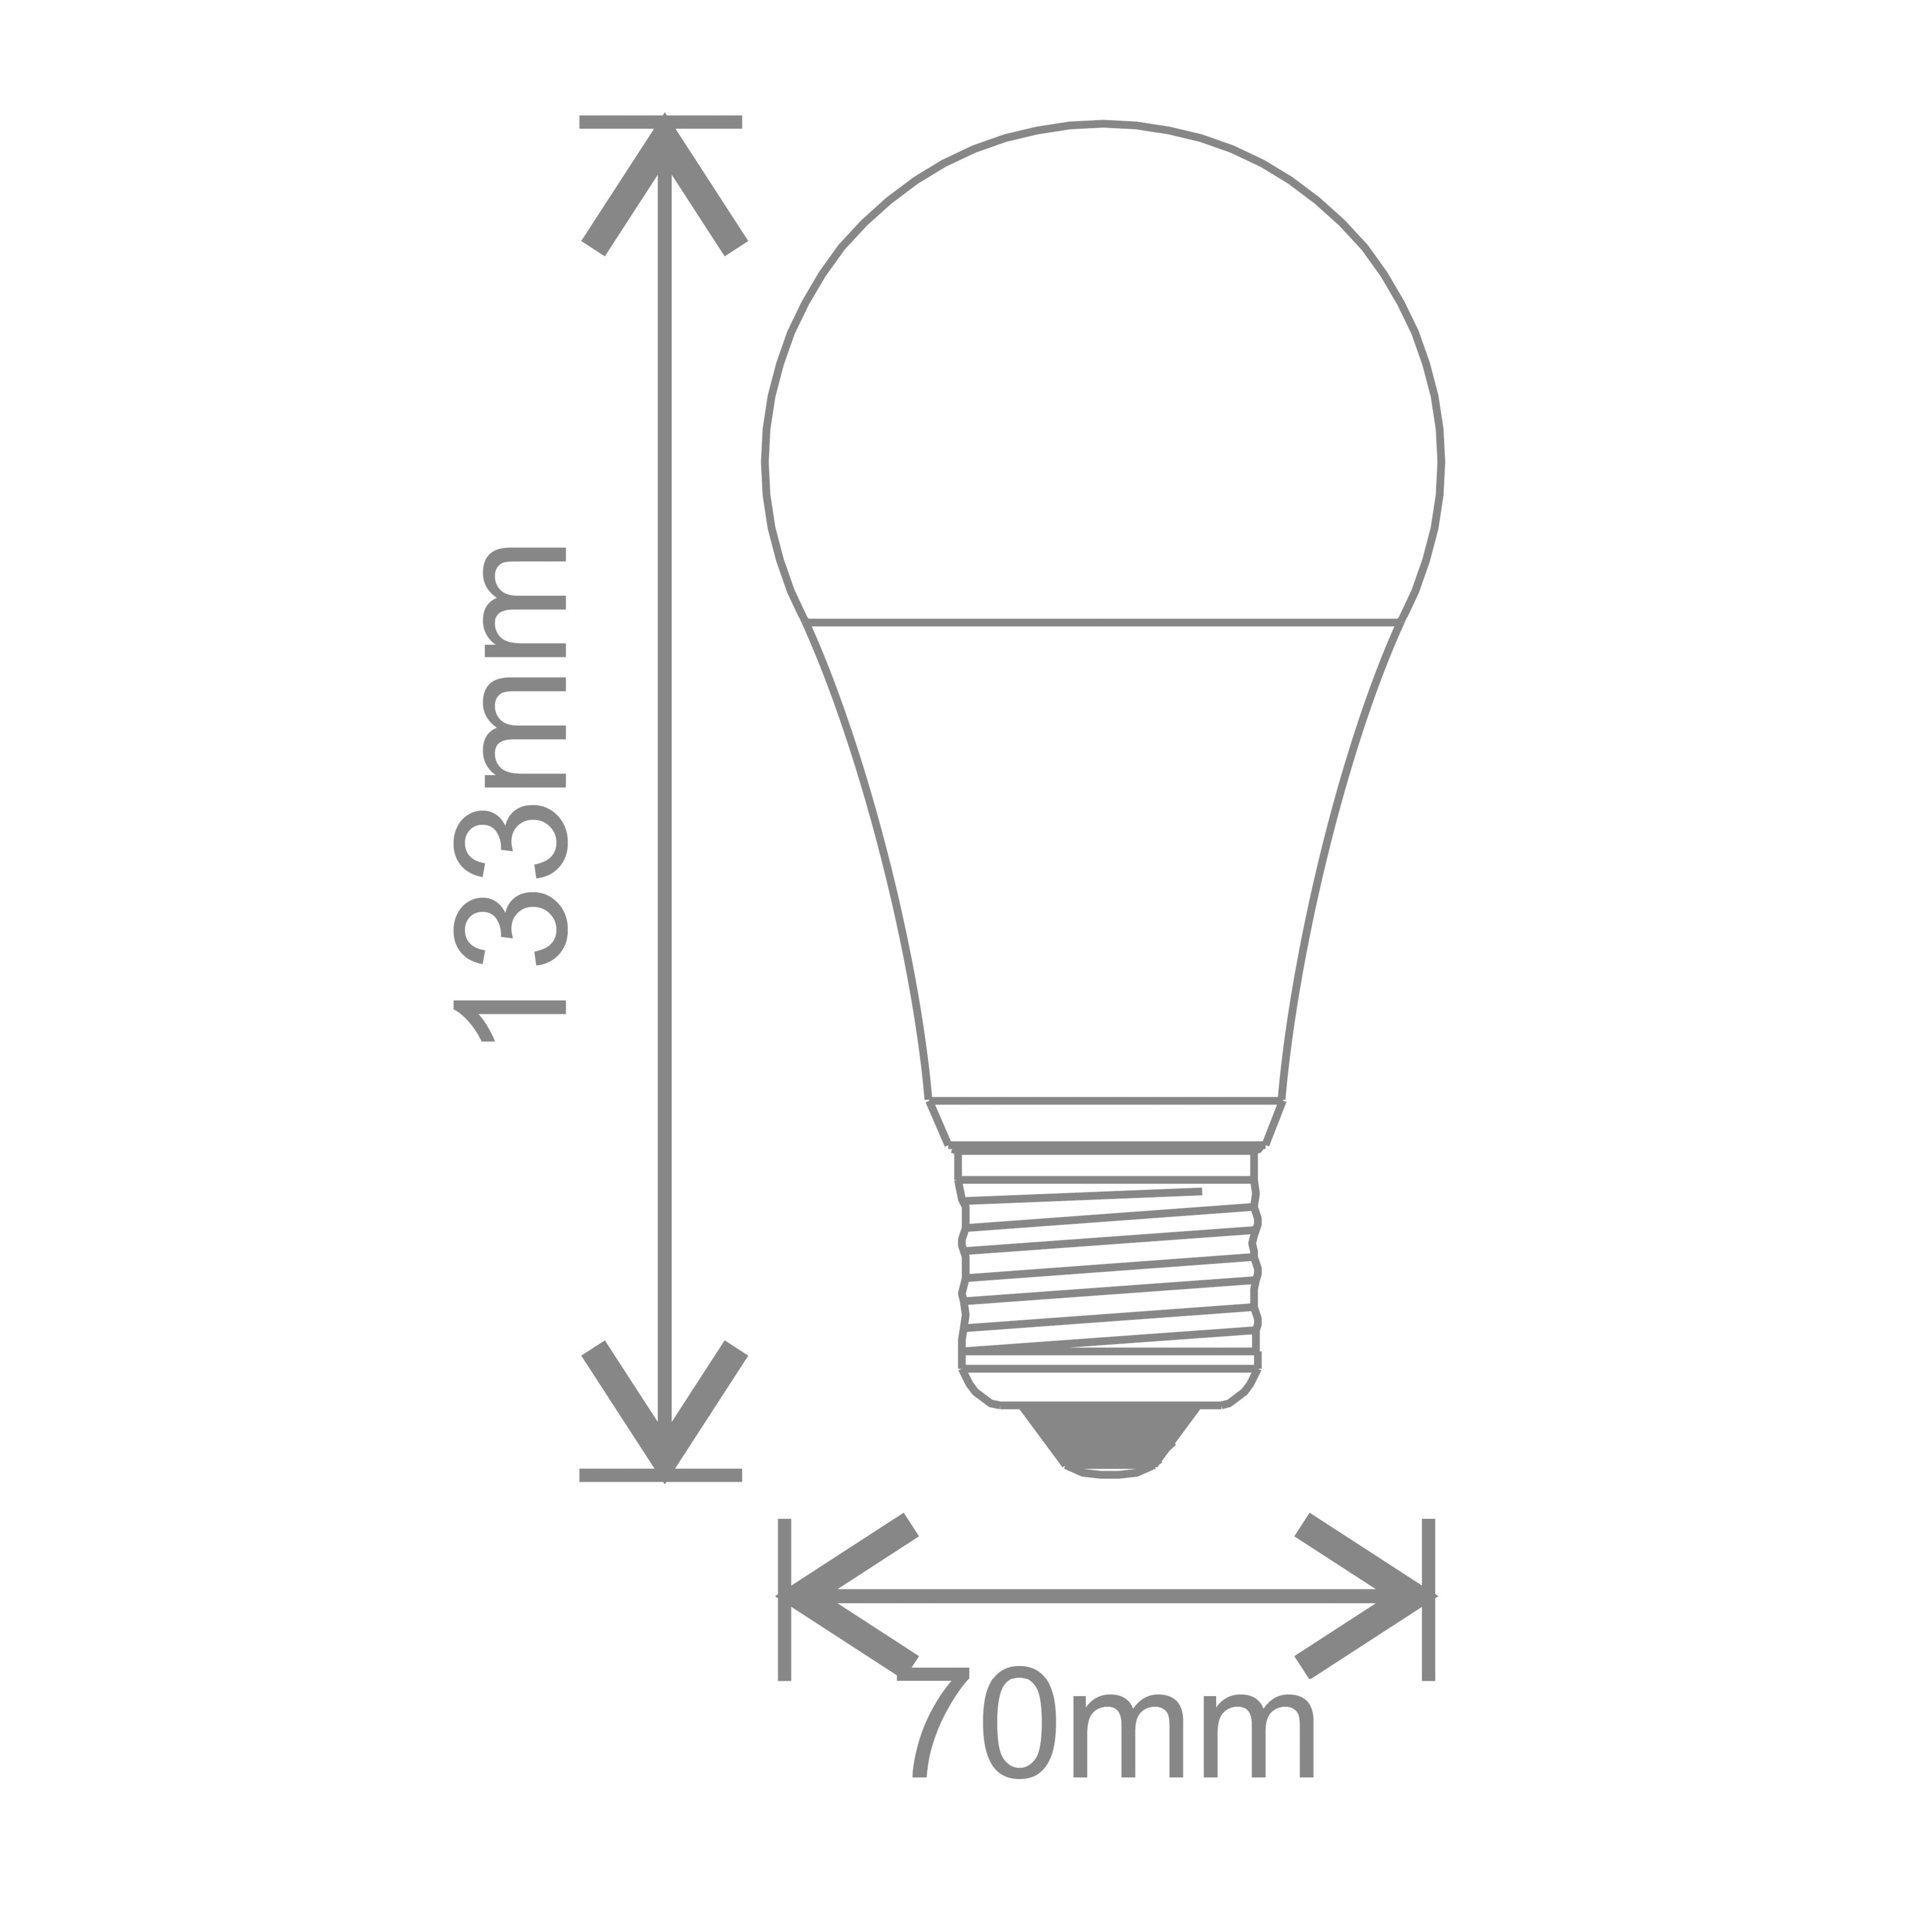 18W Non-Dimmable High efficiency LED GLS Lamp - Kosnic